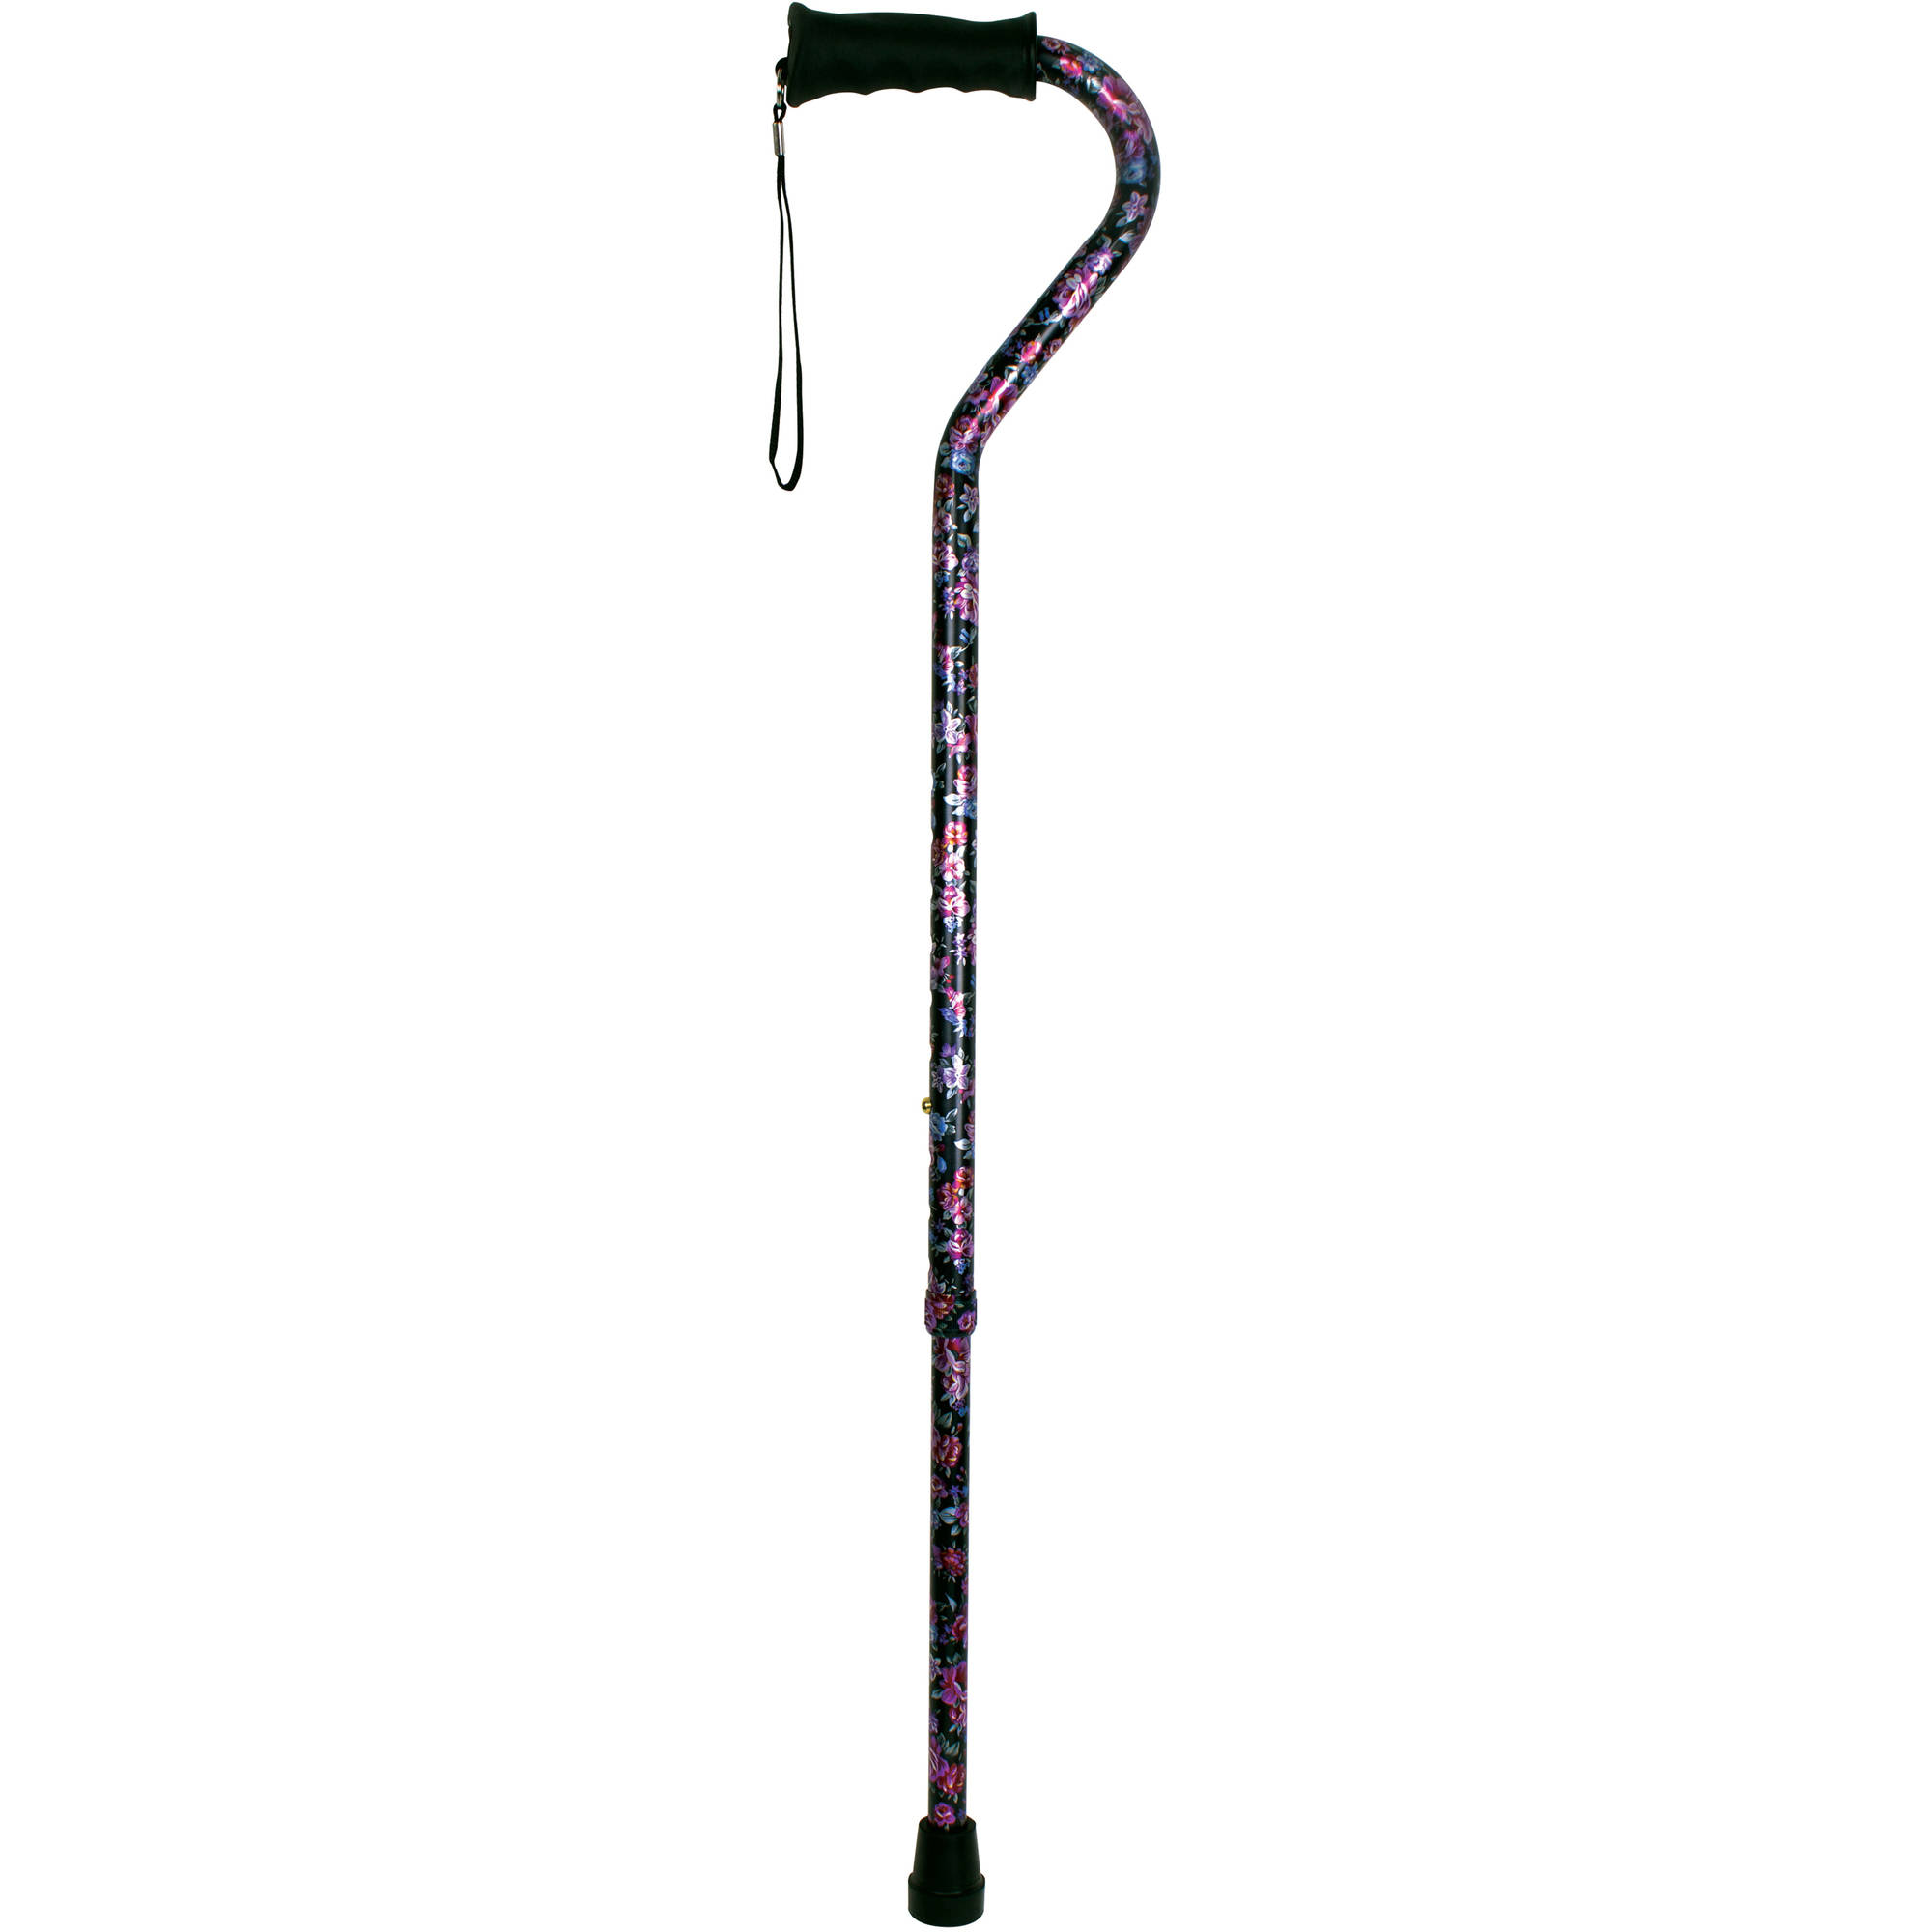 Carex Ergo Adjustable Offset Walking Cane for all Occasions, Black Flower, 250 lb Weight Capacity - image 4 of 10